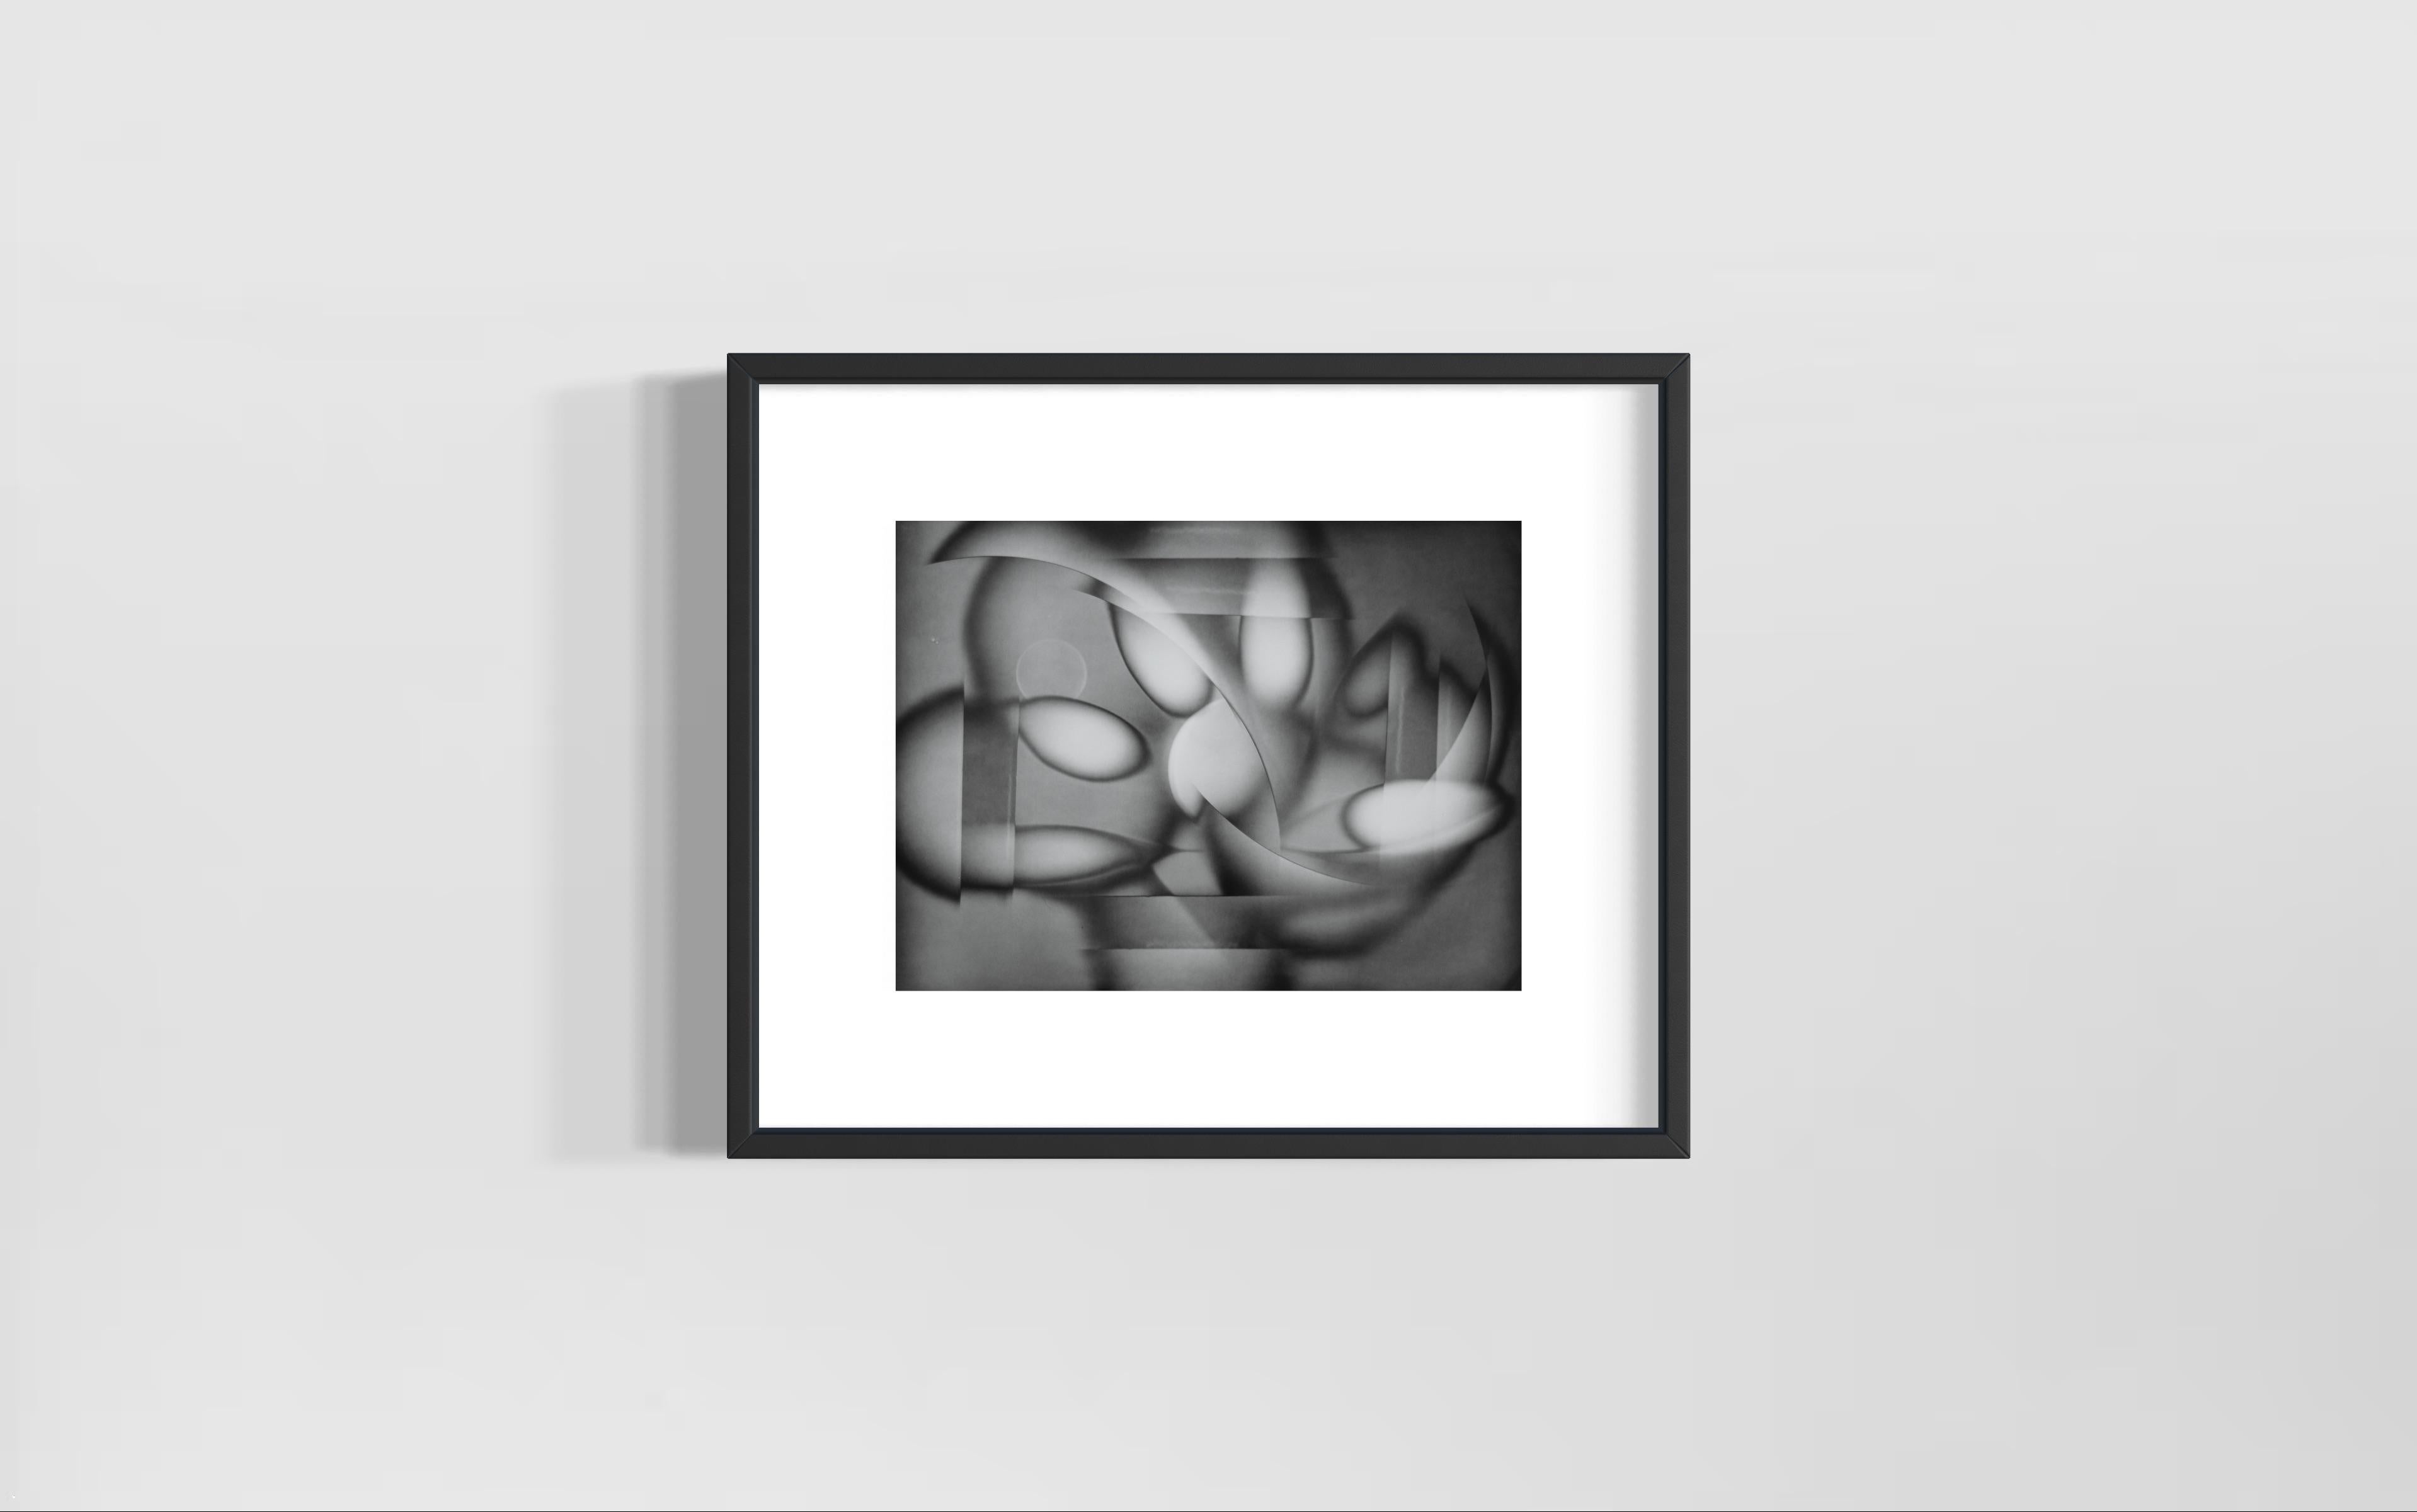 #473 FLOWERS, 2016
Luminogram, Silver Gelatin Print
Print size: 30.5 x 40.6 cm
Framed: 49 x 58 cm
Frame with the classic museum style mount board and black frame/ Print can be shipped unframed - options available with more shipping prices available